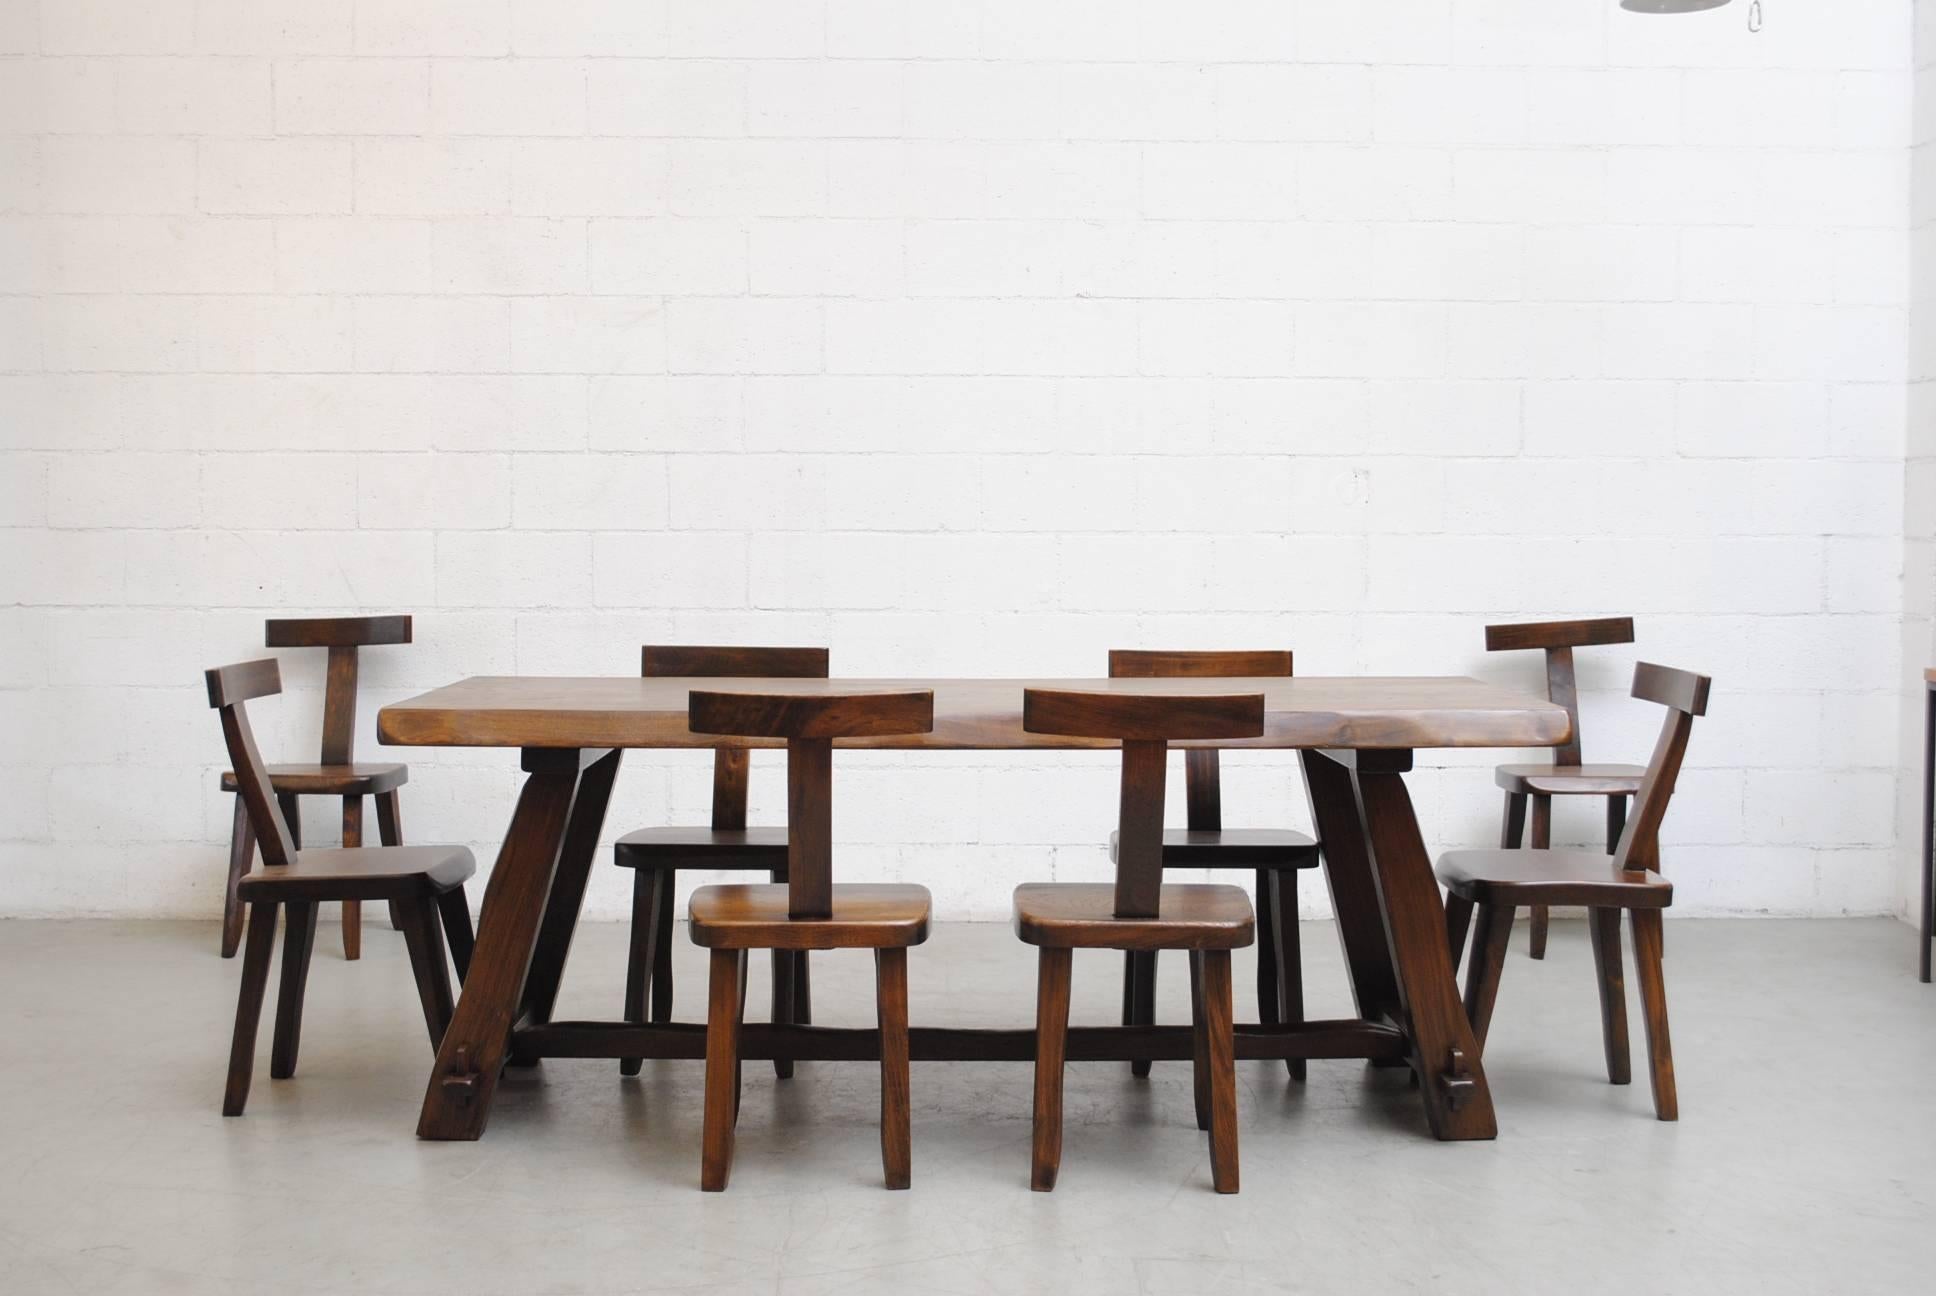 Finnish dining set by Olavi Hänninen for Mikko Nupponen, 1950s, rich black walnut table and 8 't' shaped chairs in original condition with visible signs of wear consistent with its age and usage. Sold as set. Also available are another set of eight